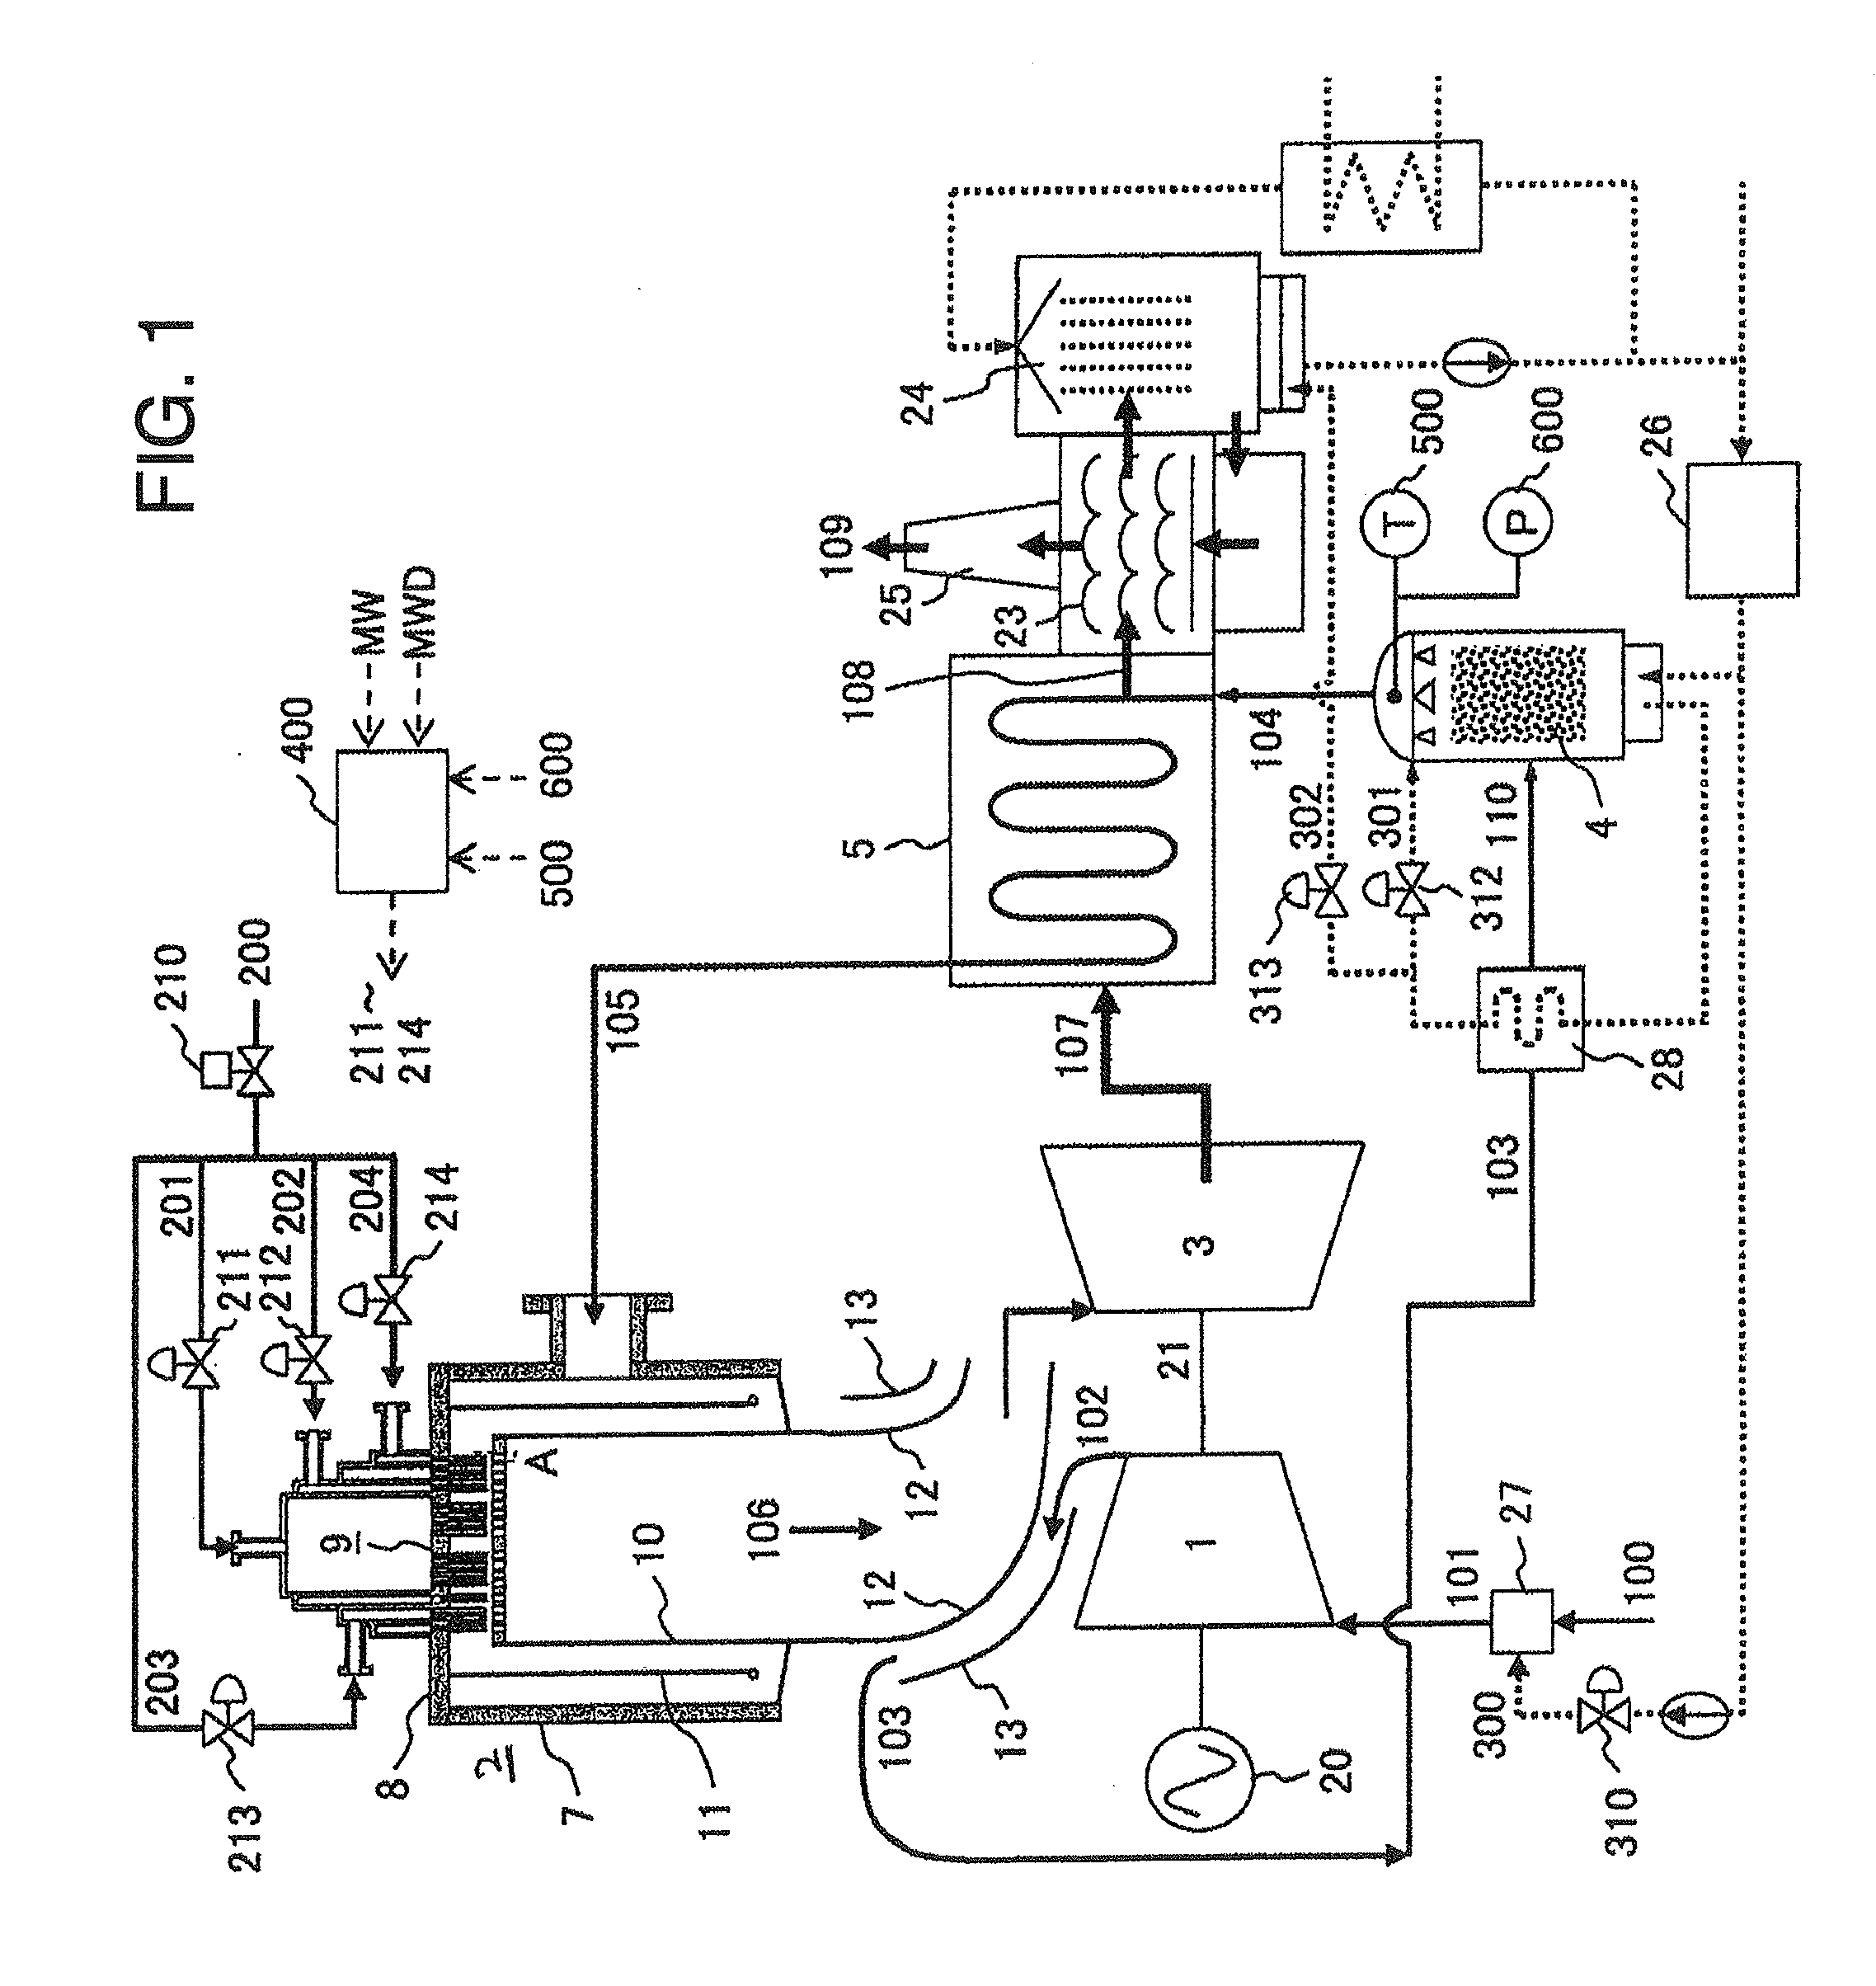 Combustor and the Method of Fuel Supply and Converting Fuel Nozzle for Advanced Humid Air Turbine